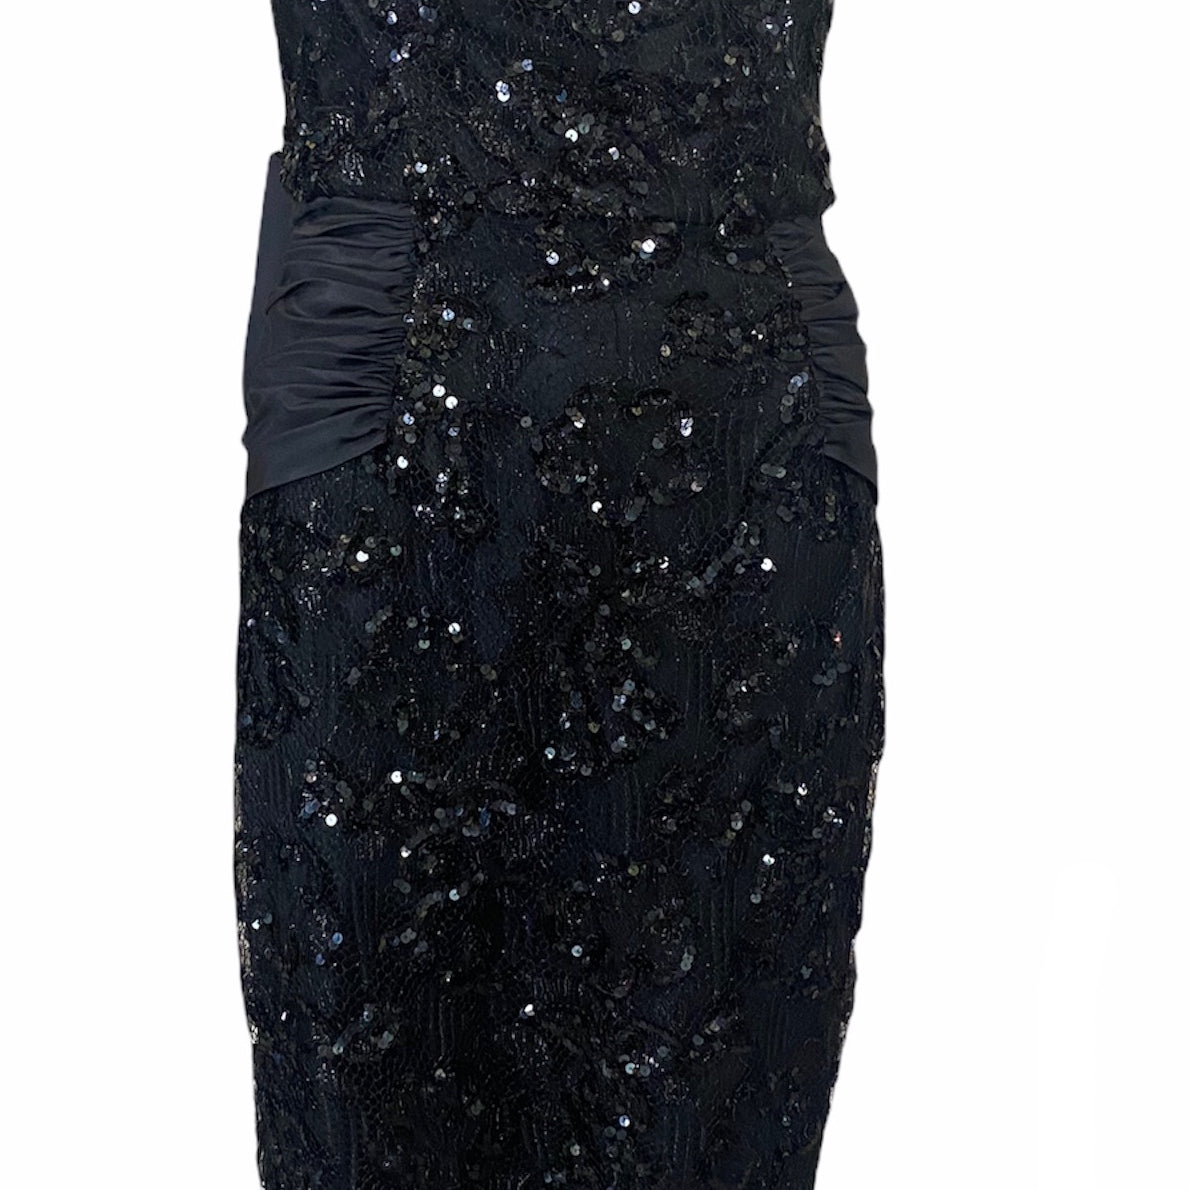 Vicky Tiel 80sBlack Strapless Lace and Sequin Cocktail Dress FRON 1 of 4